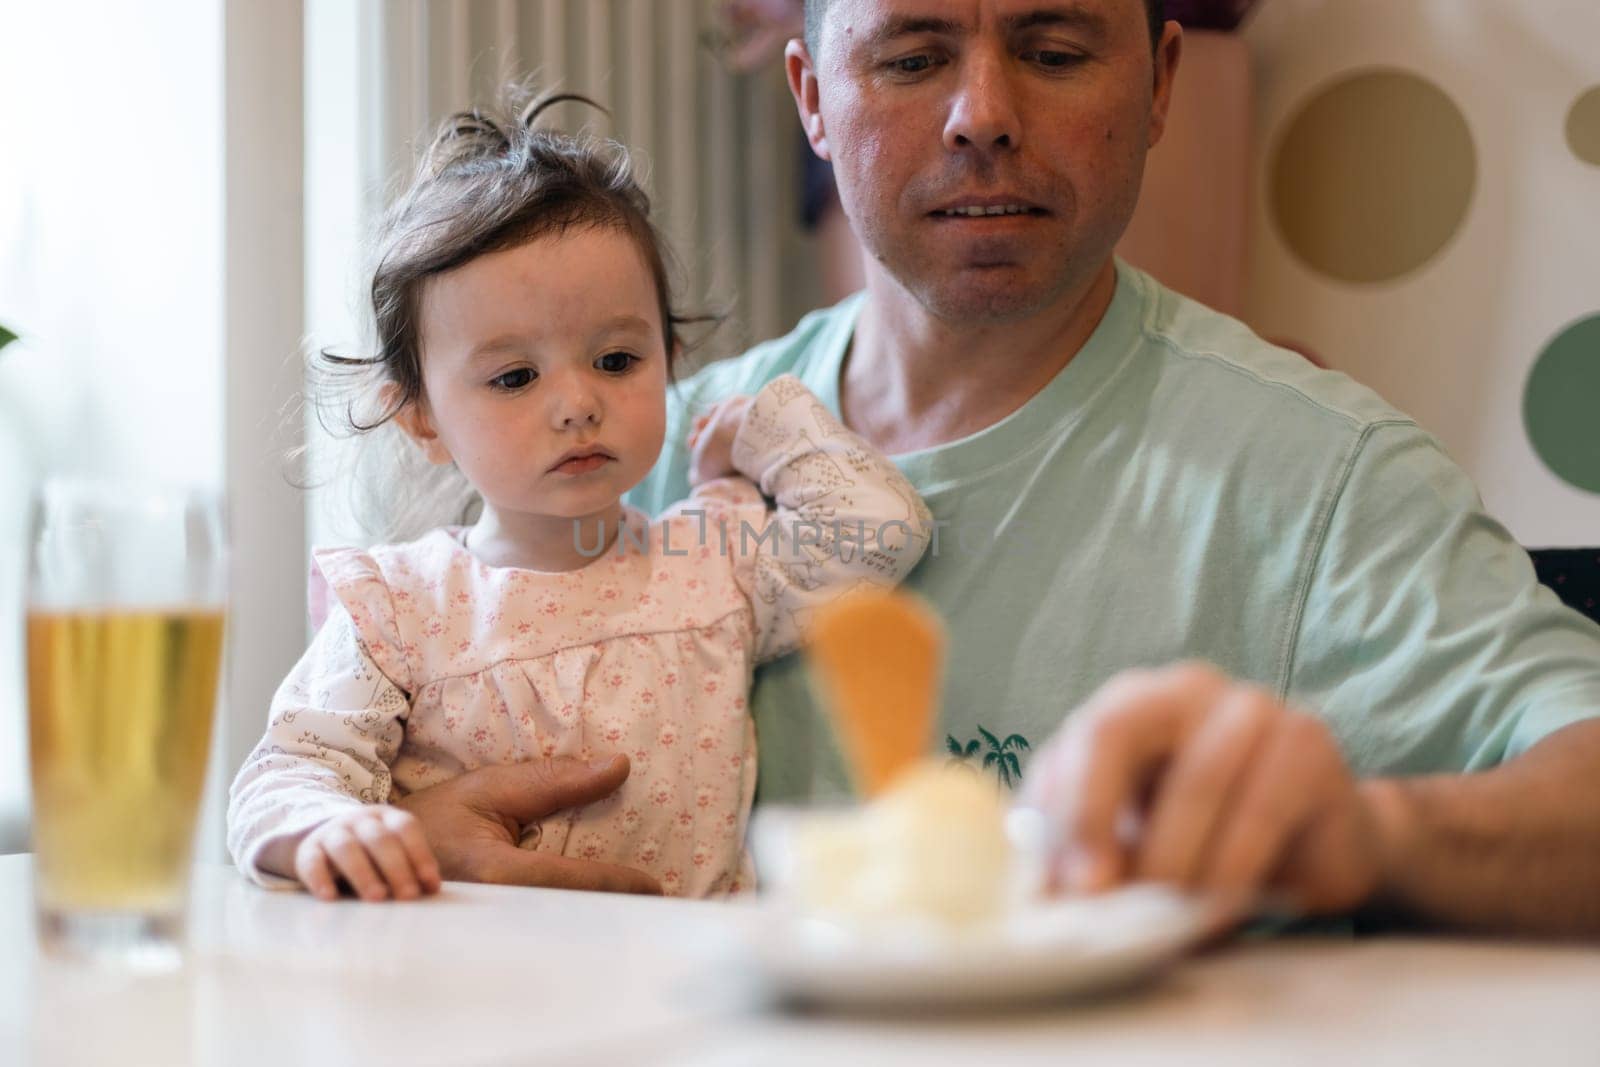 Portrait of one handsome caucasian man with a little girl in her arms, sitting at a table with a drink in a glass and reaching for a dessert while sitting on a sofa in a cafe against the background of an abstract wall, close-up side view.